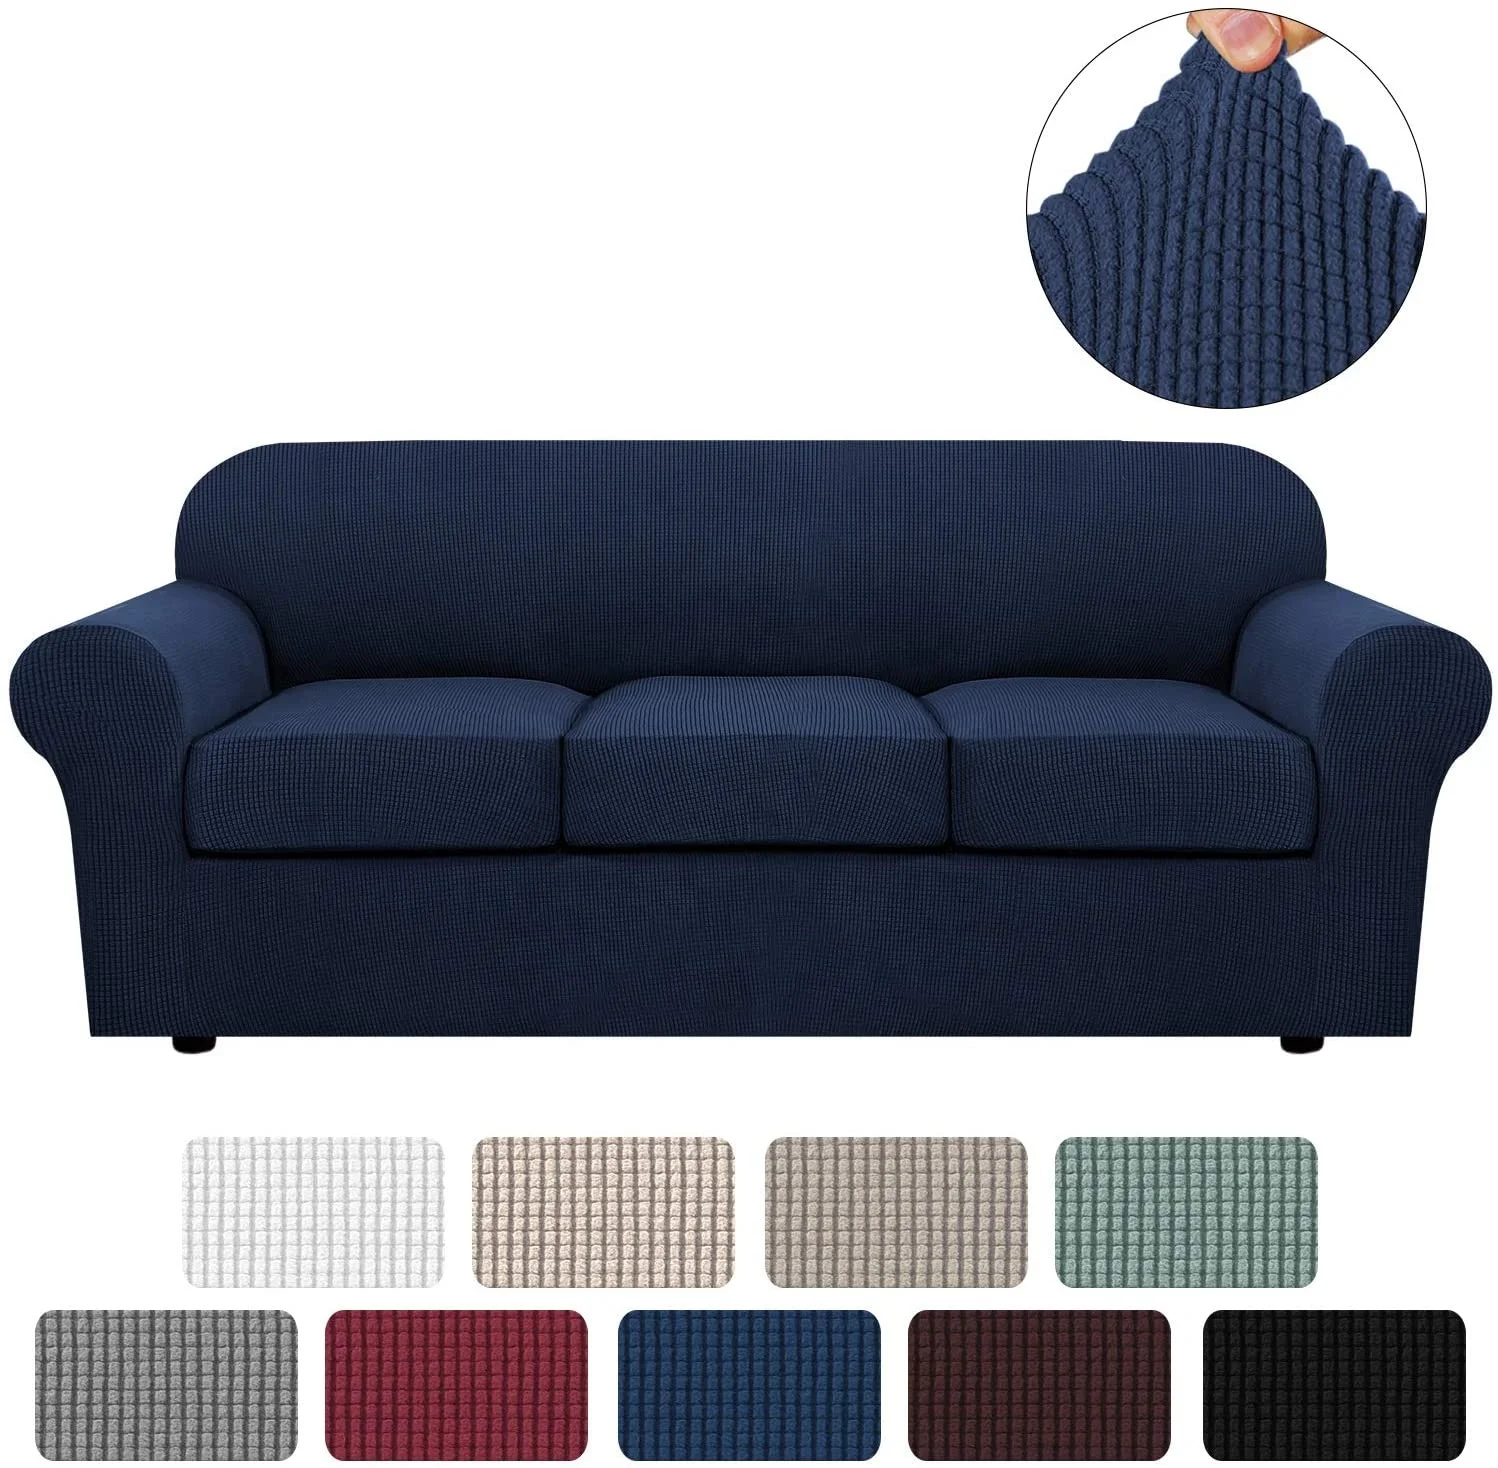 Hot Sale 4 Pieces Elastic Sofa Cover Jacquard super soft stretch material 3 Seaters couch slipcover